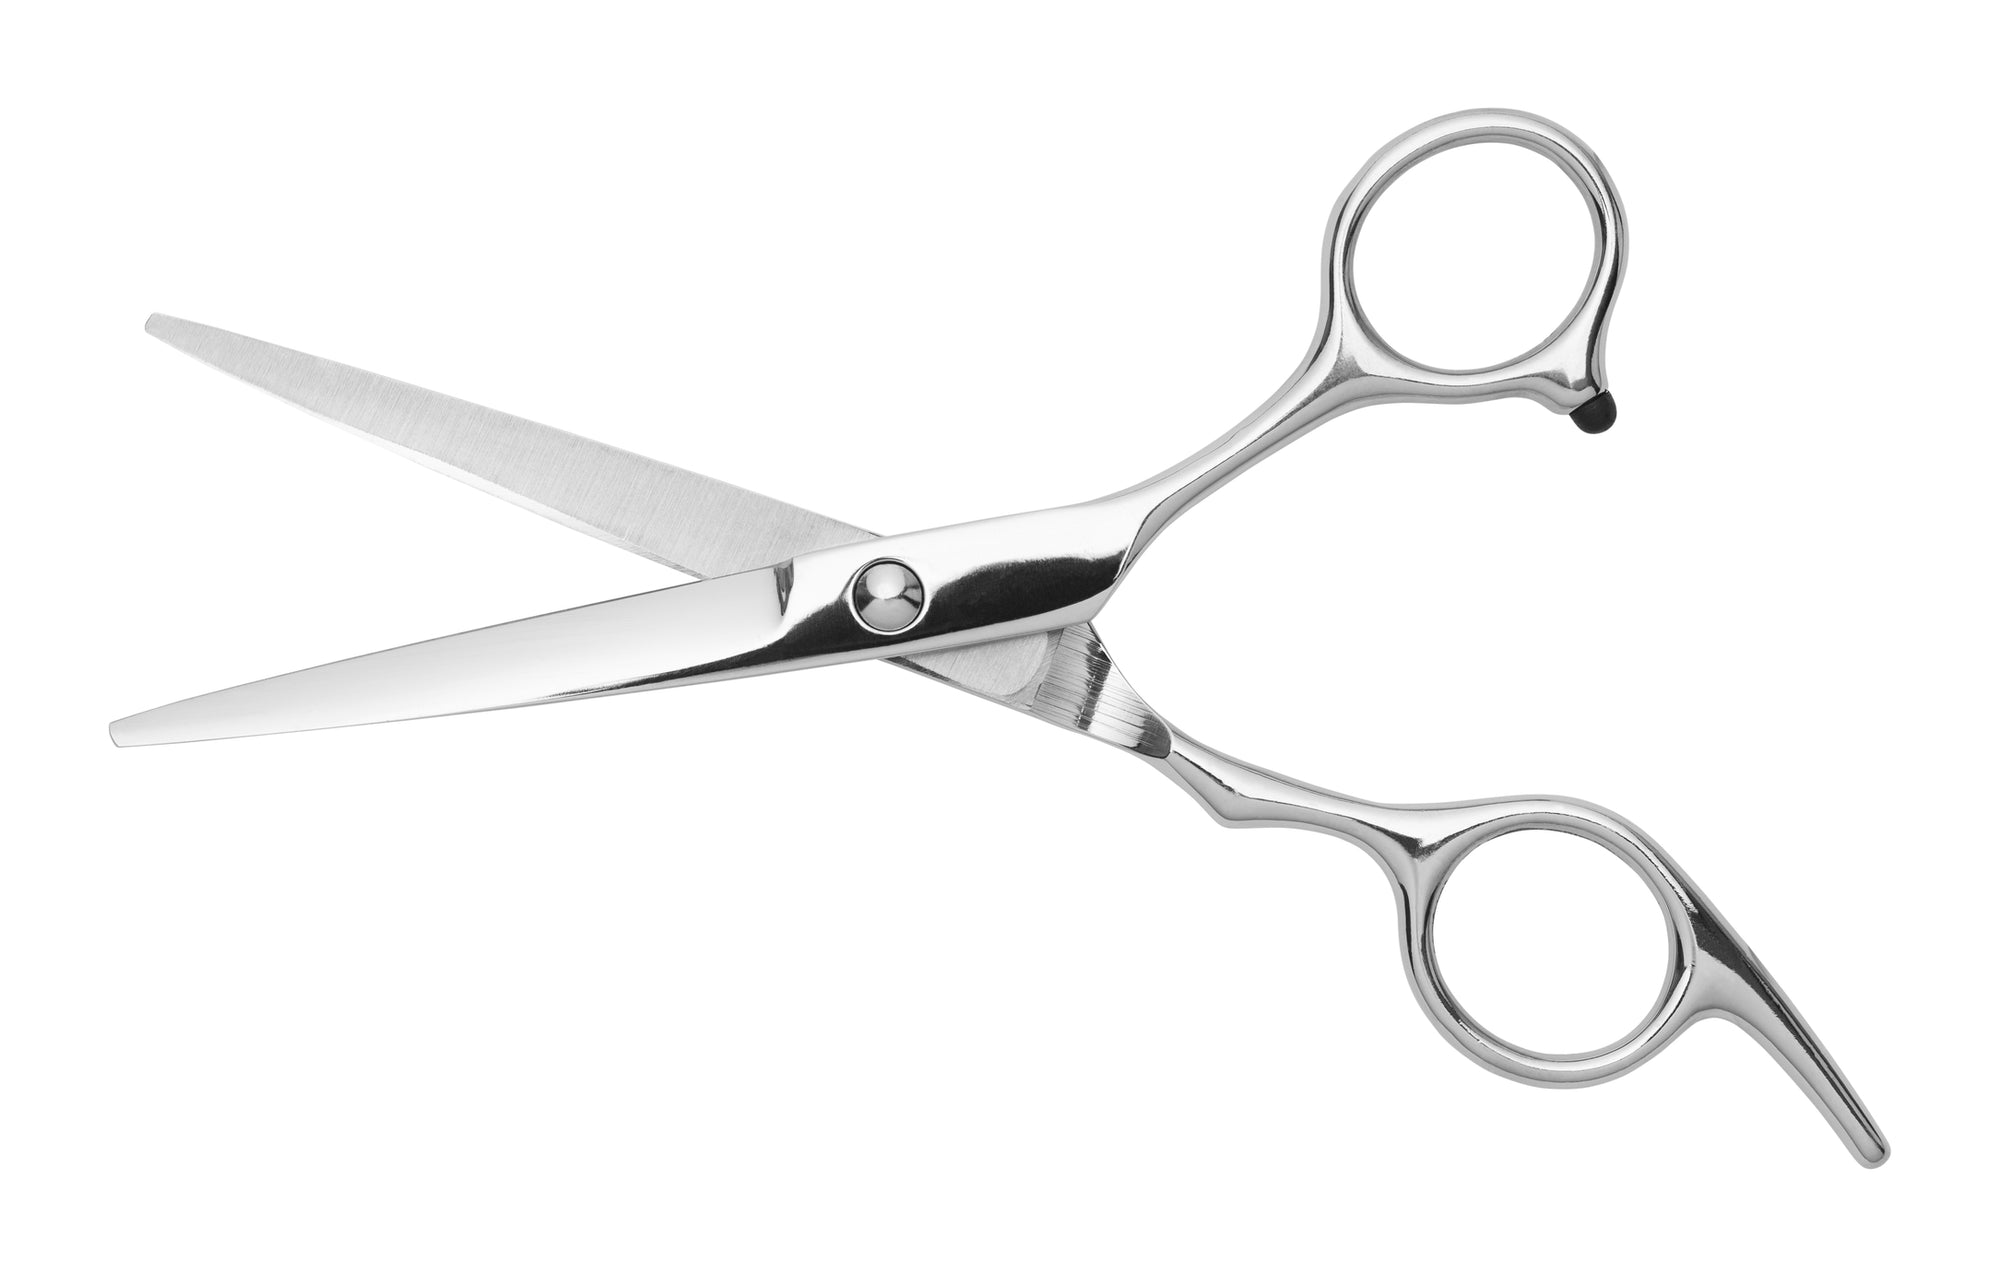 An example of the best professional hair cutting scissor